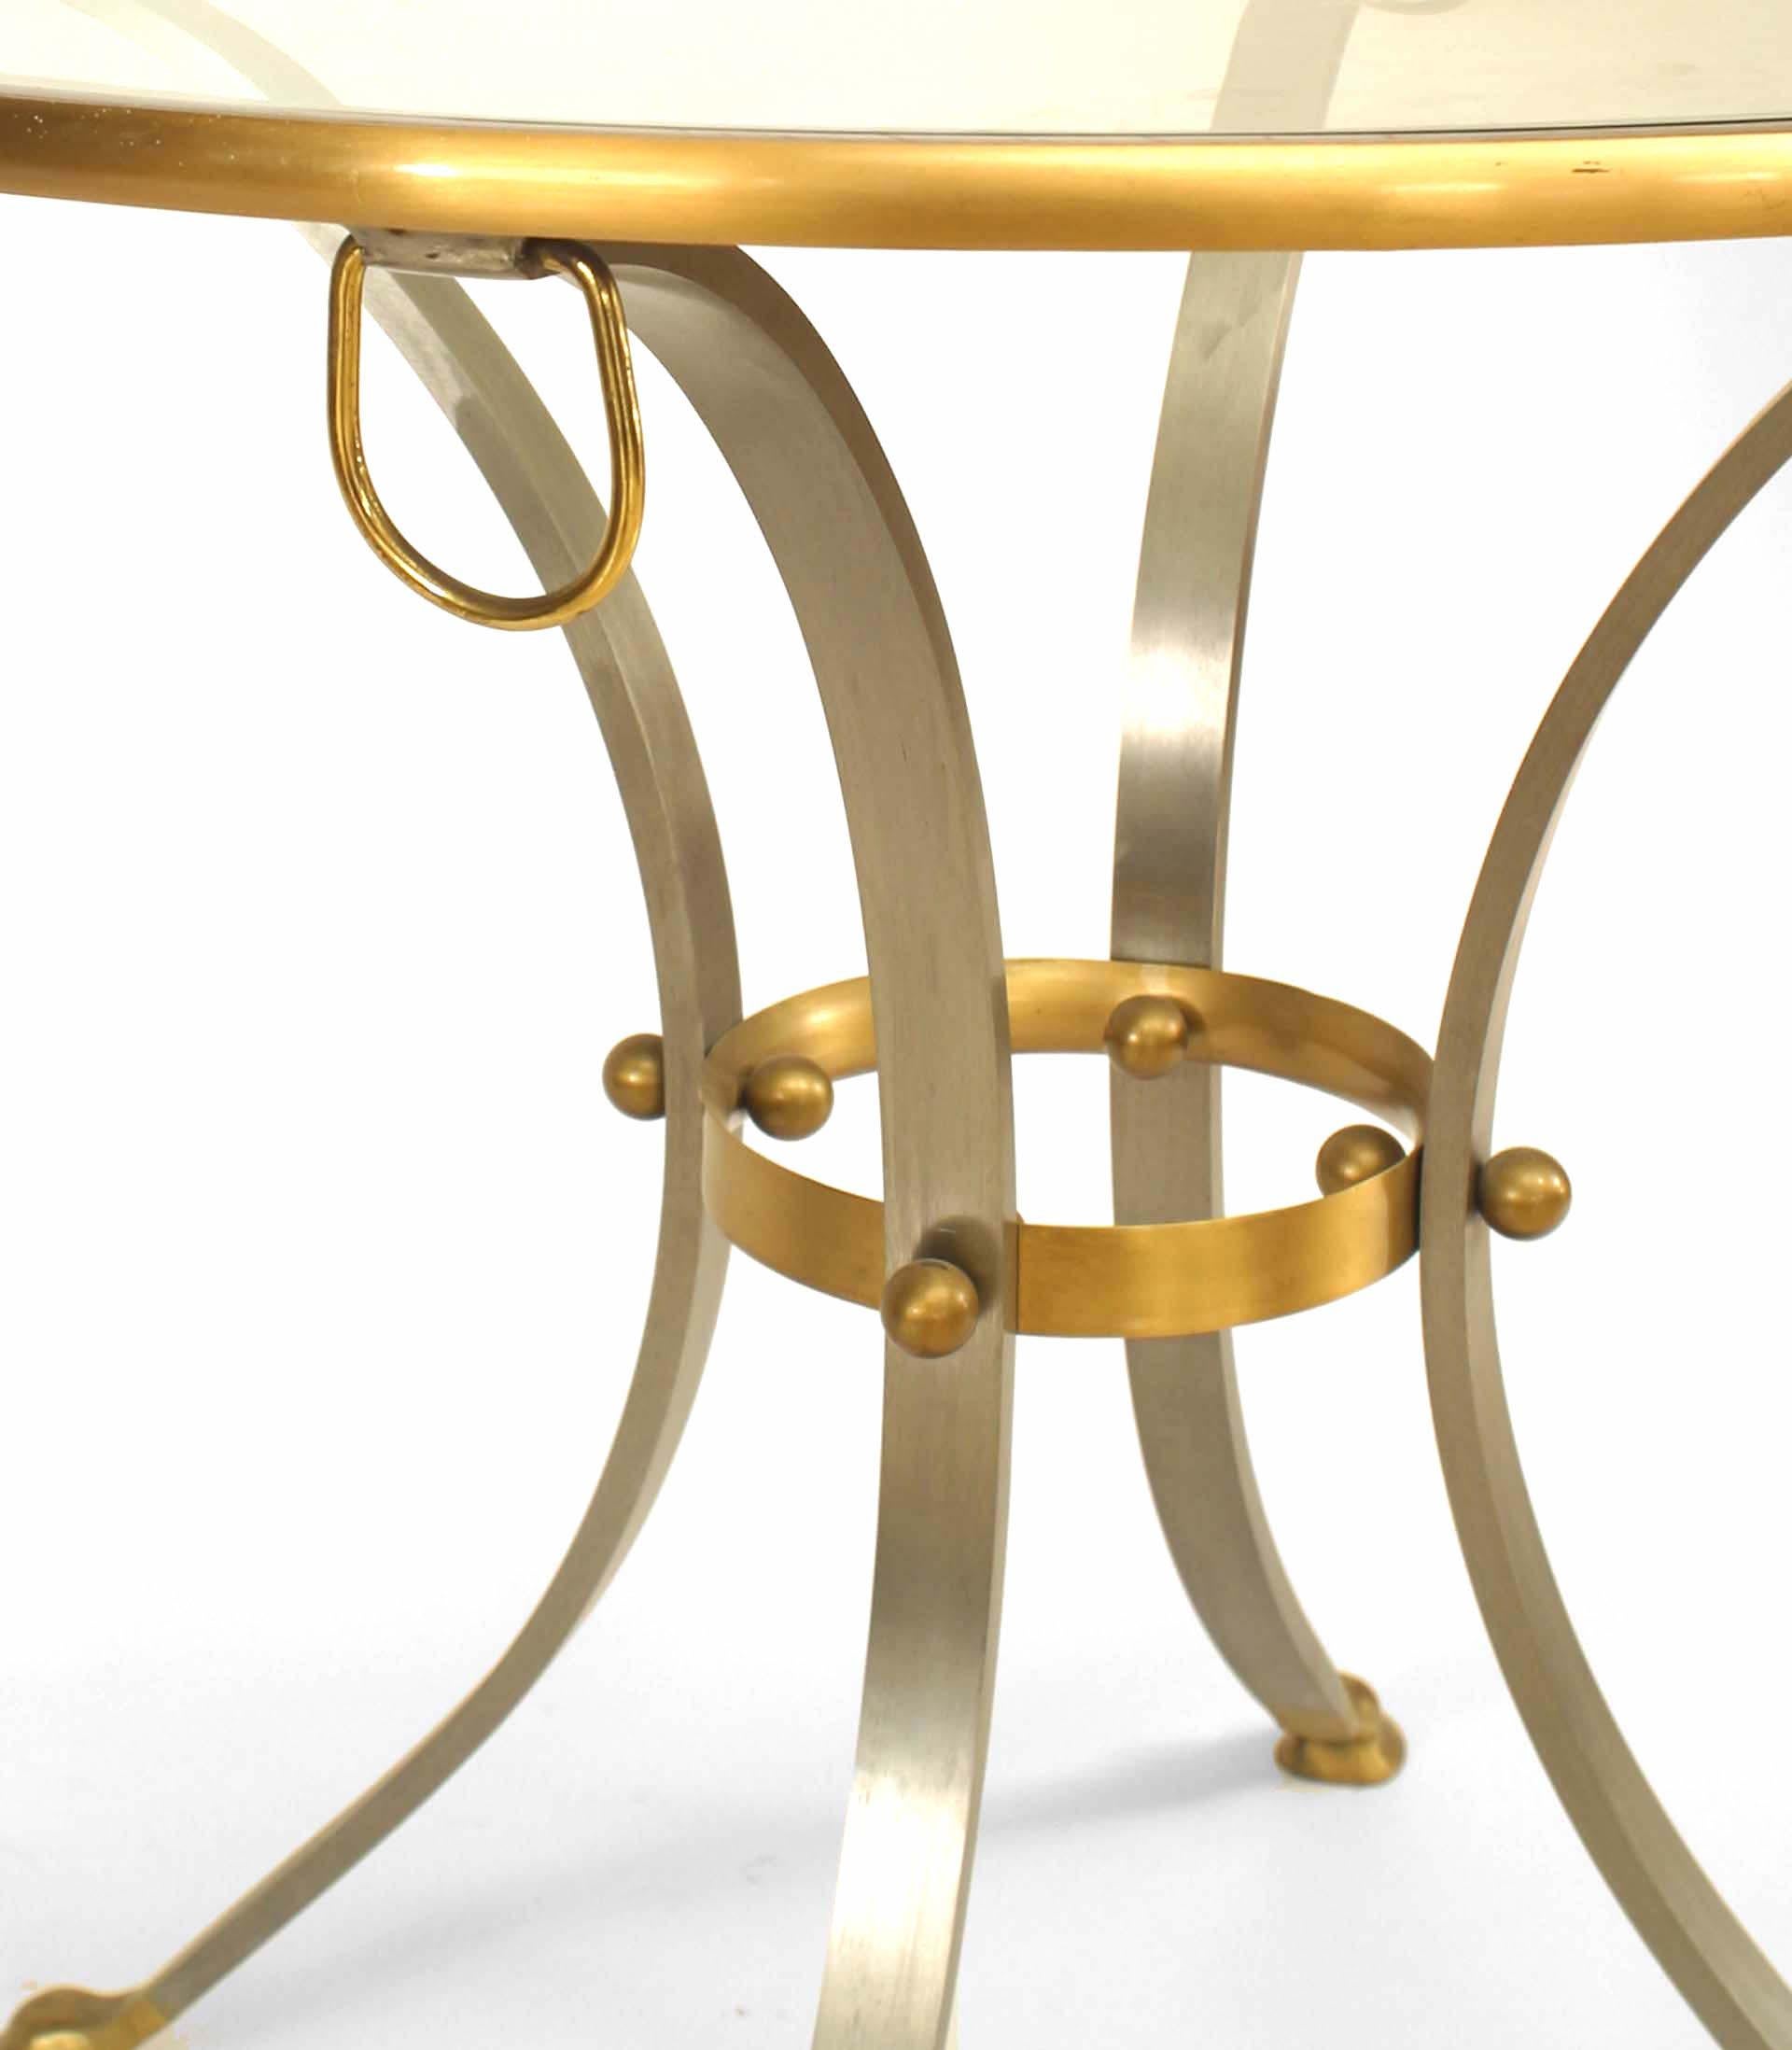 Art Moderne style (1960's) steel round center table with glass top and bronze edging and ball and ring detail culminating in cloven feet.
